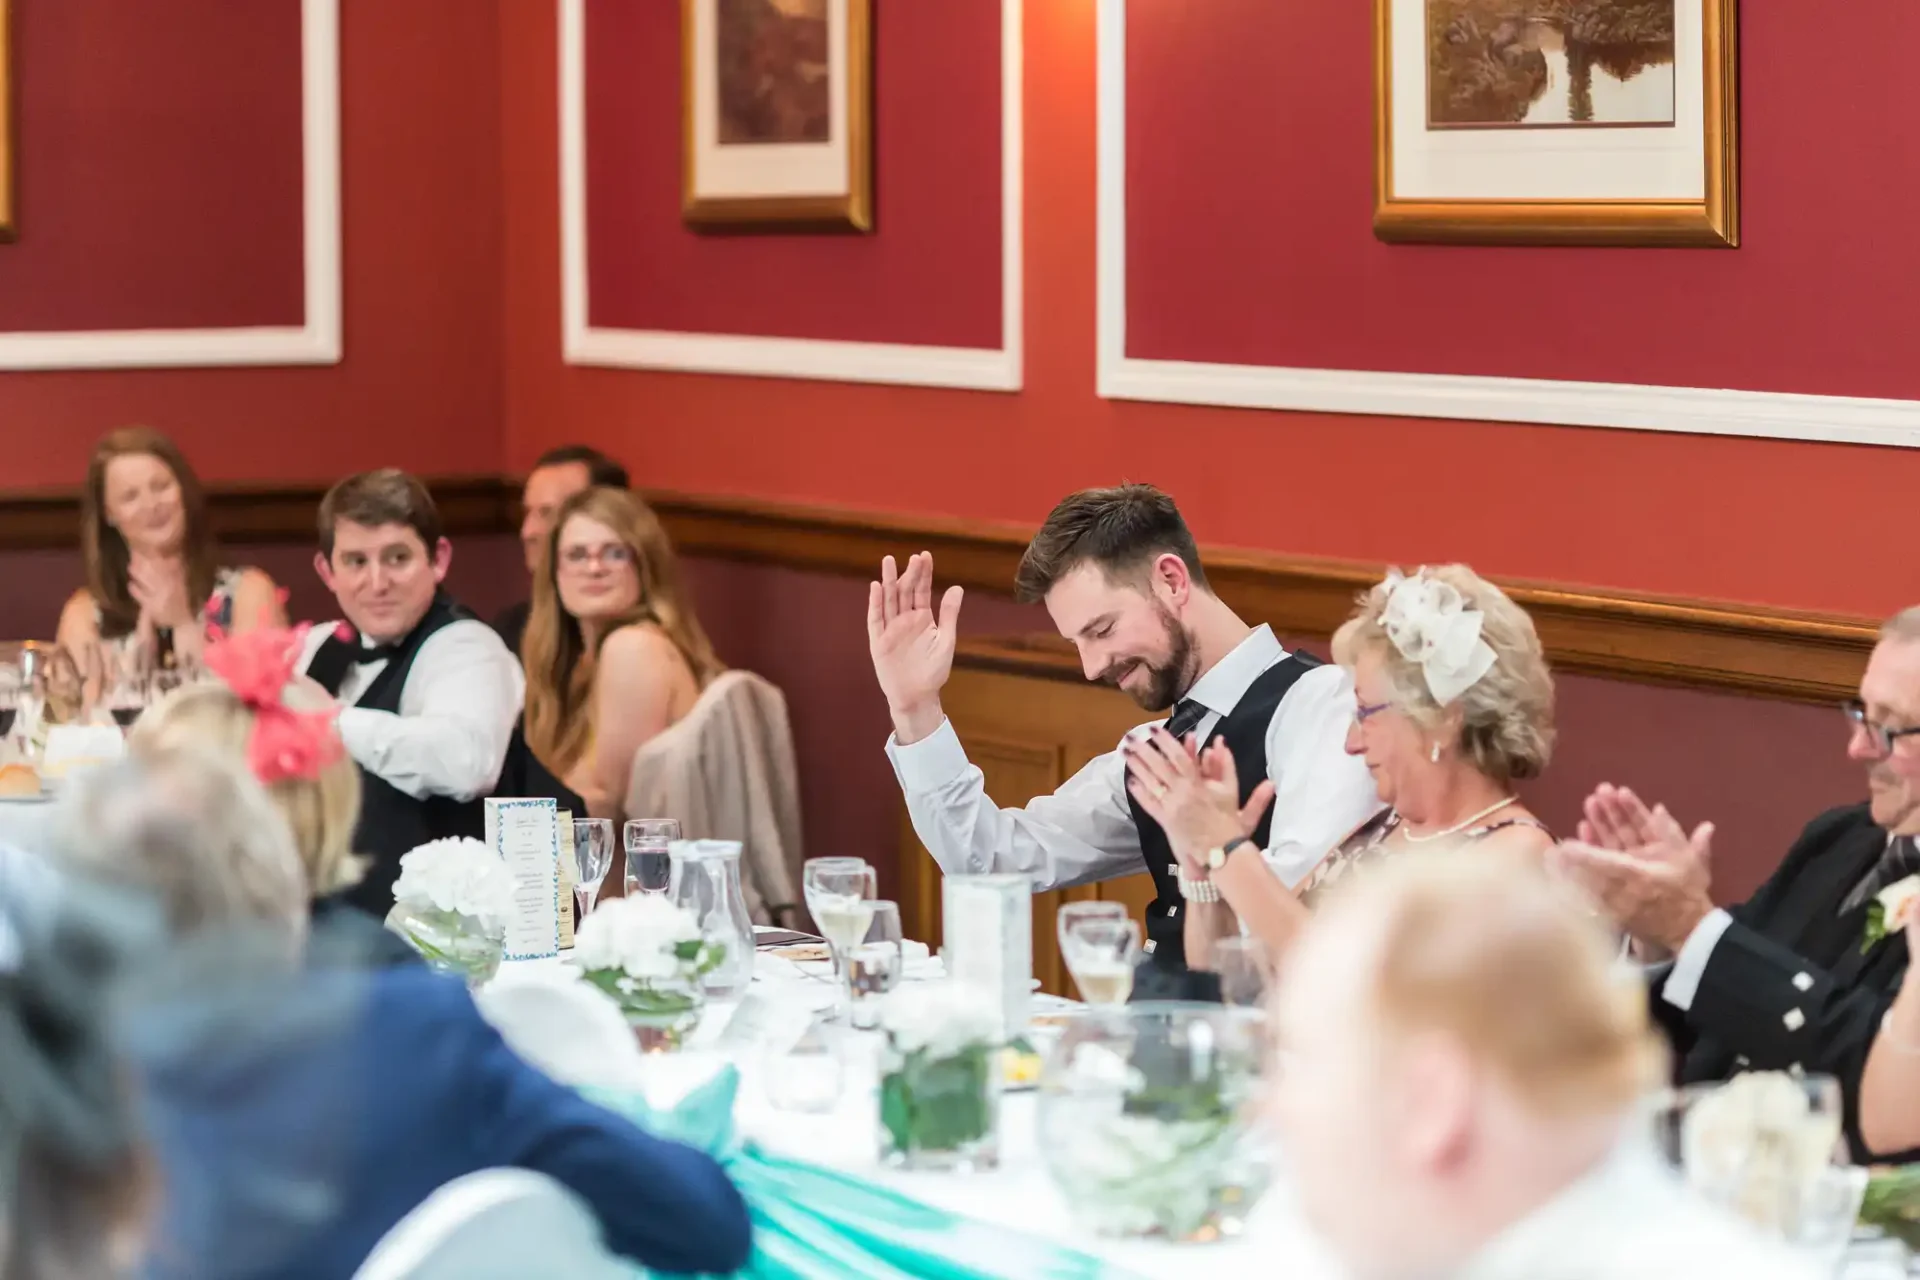 A wedding reception scene where a bearded man in a suit raises his hand joyfully at a table as others around him clap and smile.